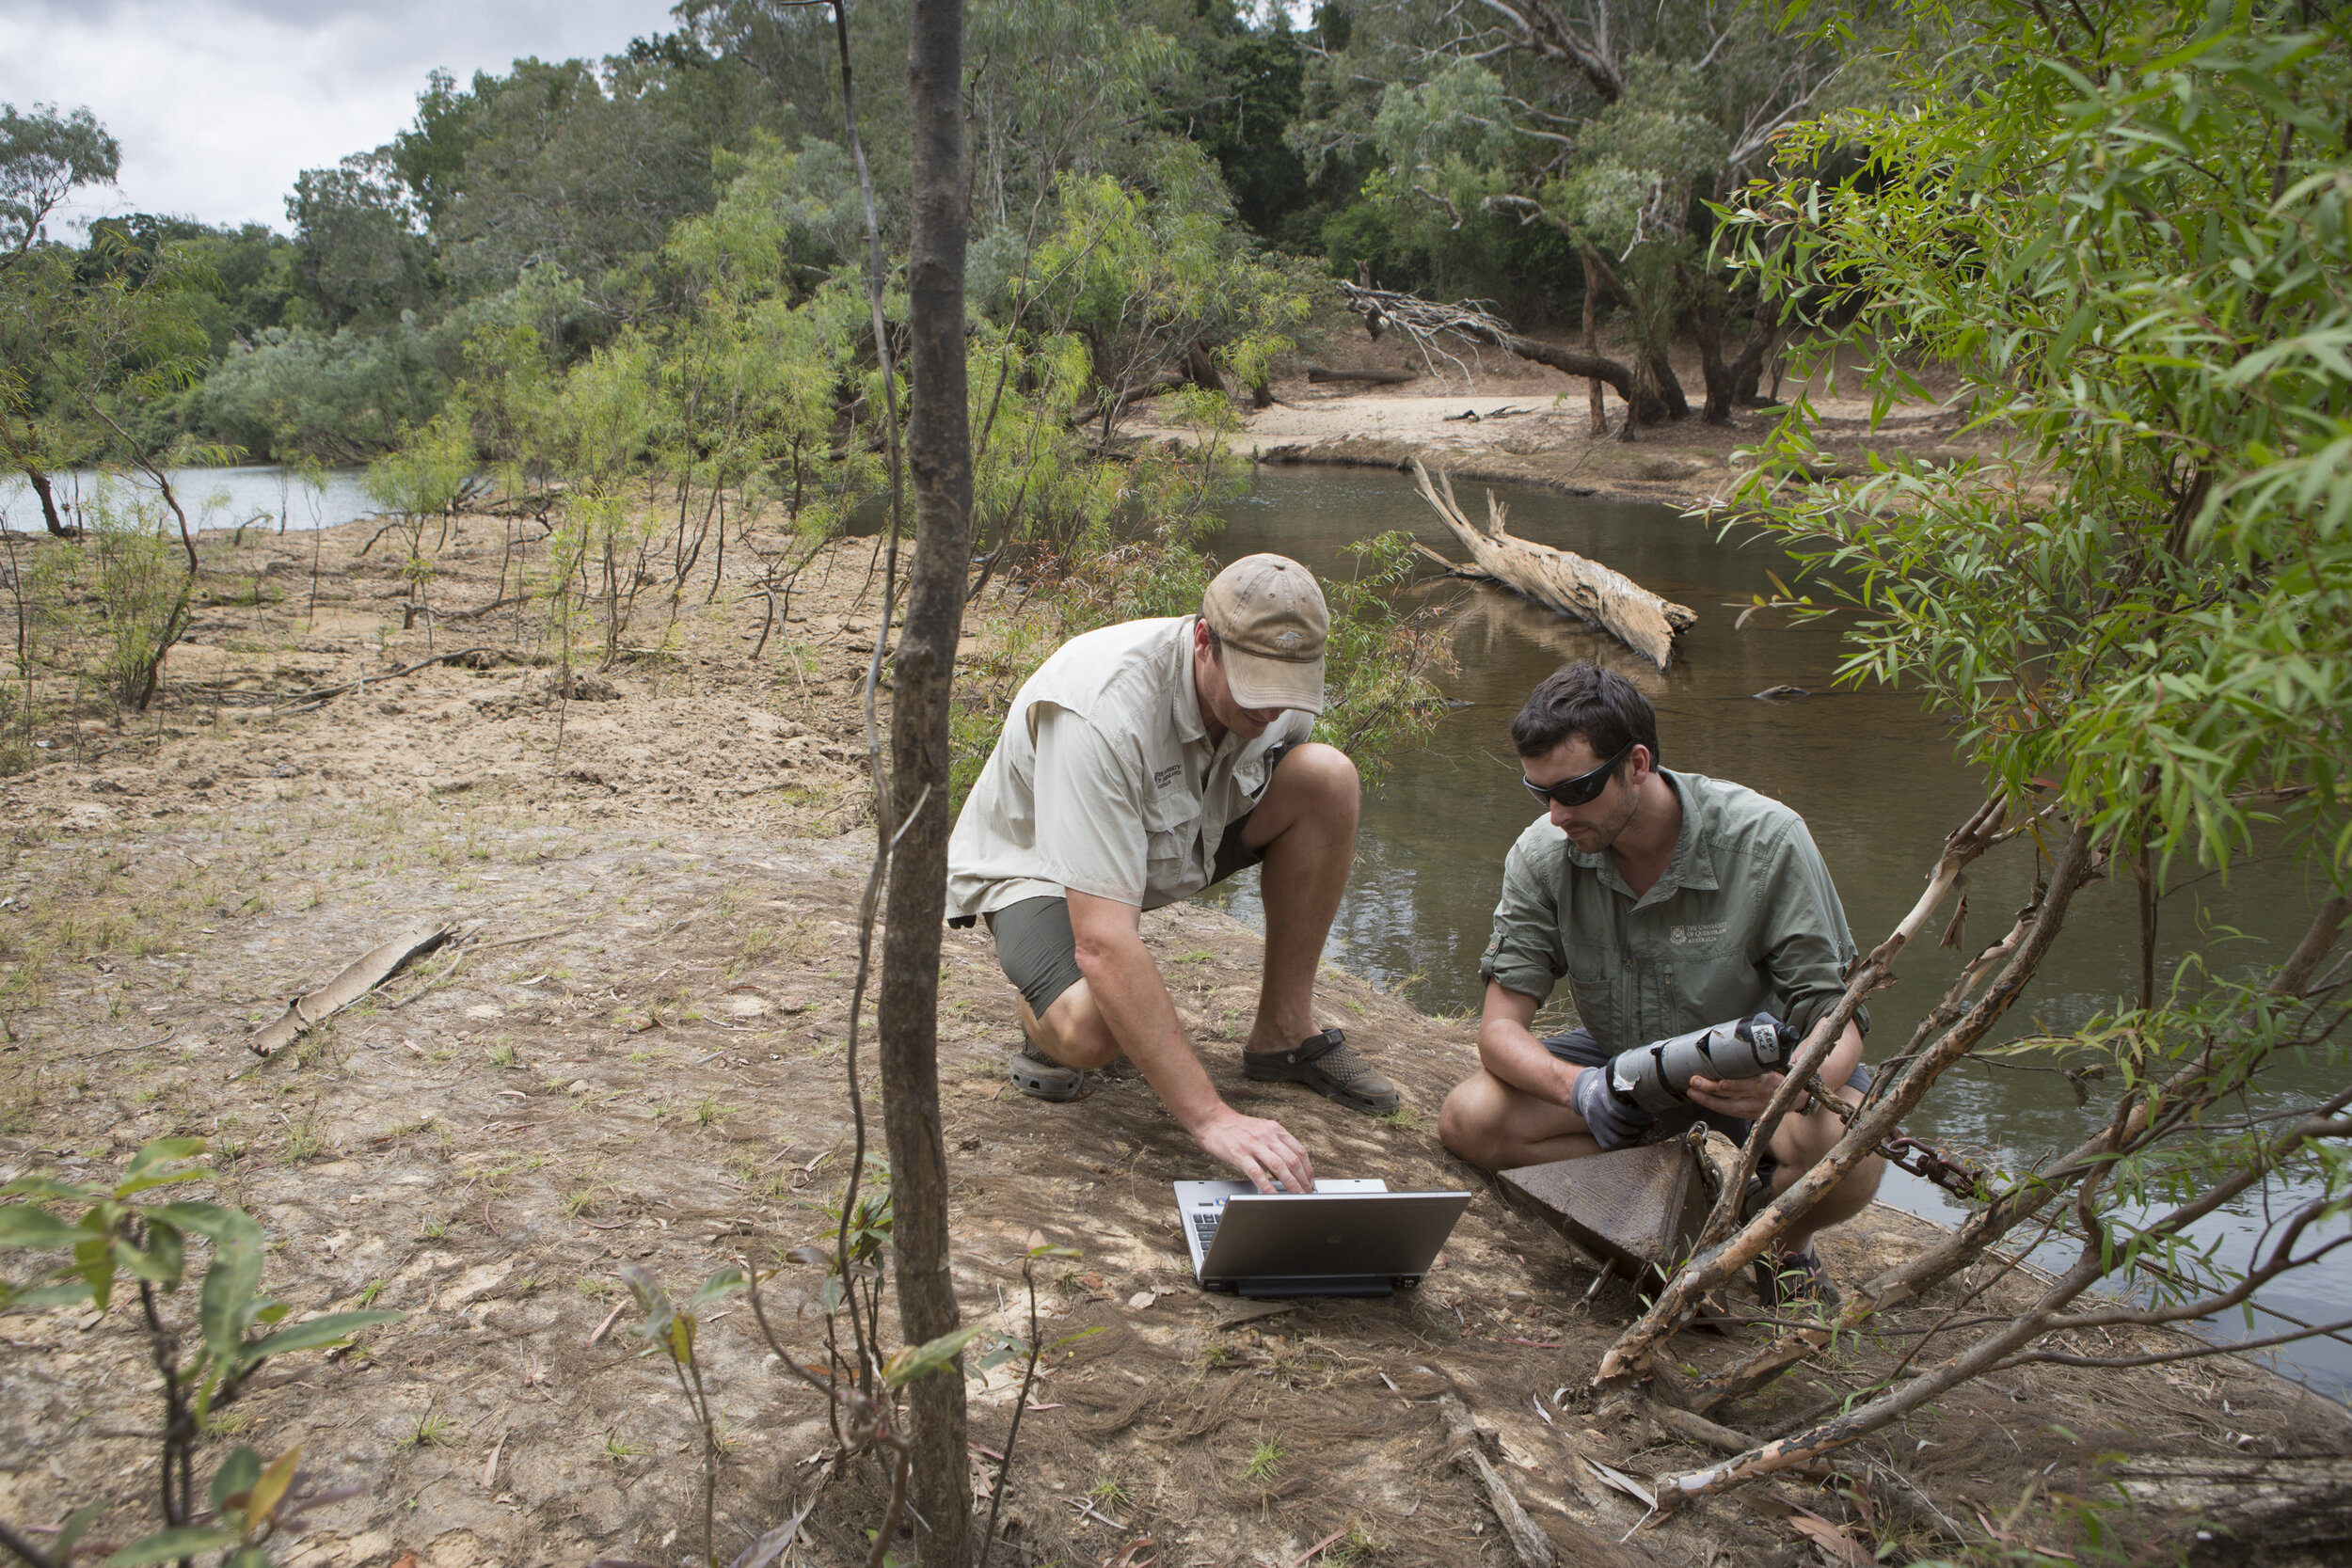  Dr Ross Dywer Post Doctoral Research Associate Uni of Qld, Pulling up passive acoustic receiver to download the presence of tagged crocodiles from the past 12 months.Dr Hamish Campbell Research Associate Uni of Qld checking results on laptop 